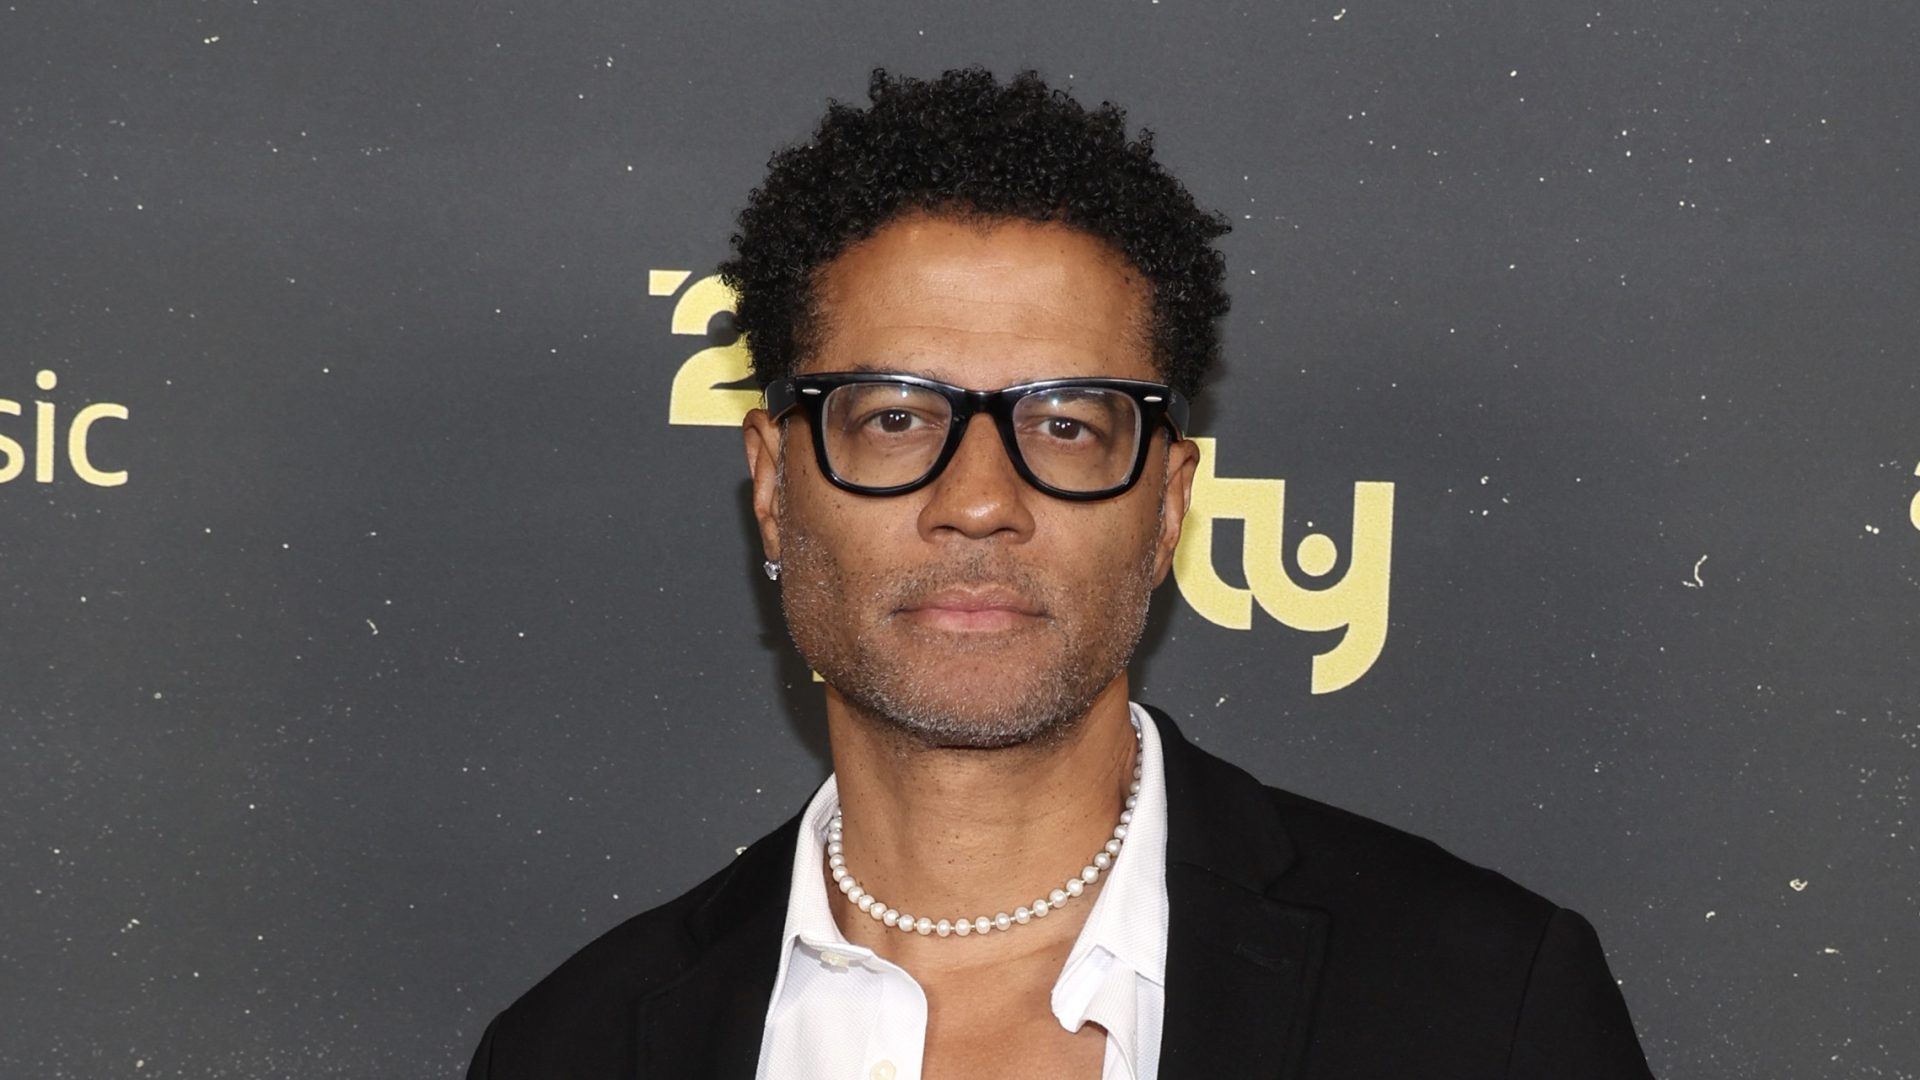 Whew! Eric Benét Goes Viral After Flexin’ His Vocals From The Bathtub (WATCH)